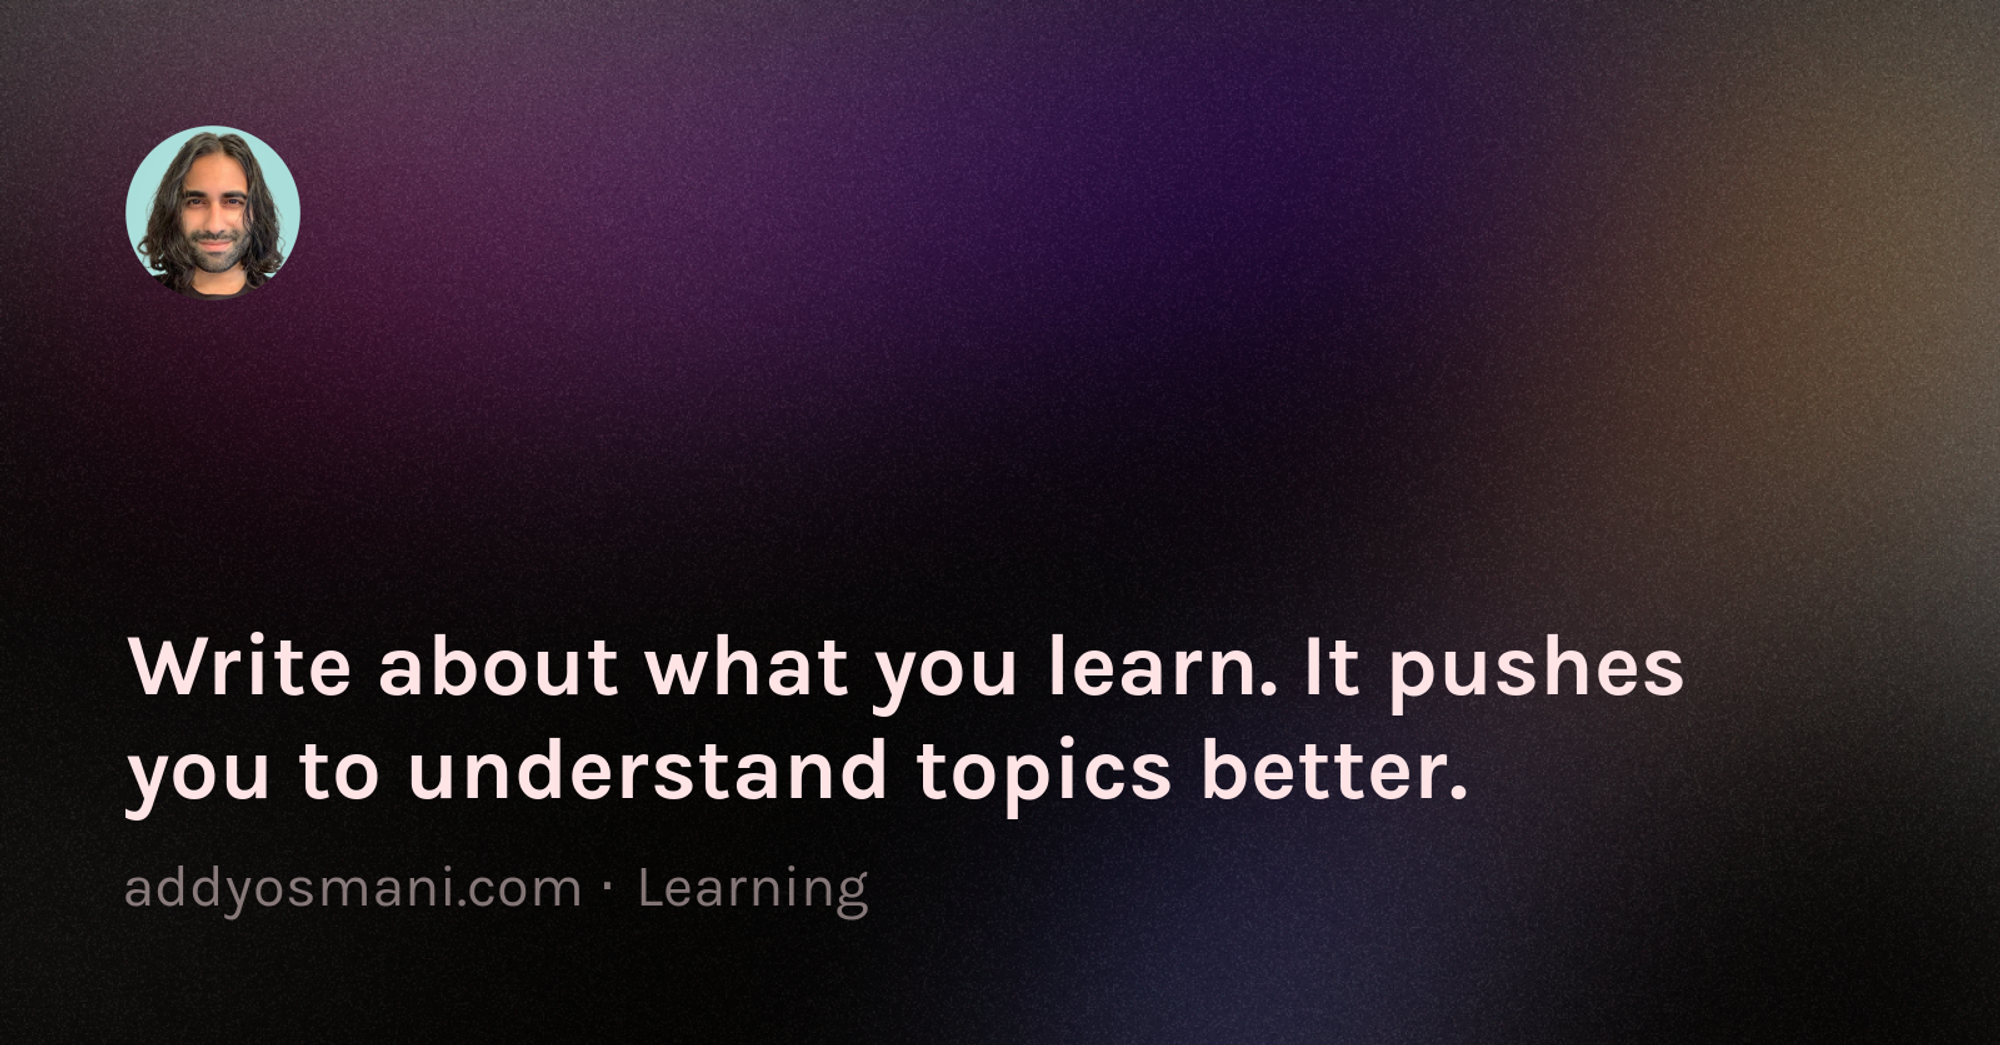 Write about what you learn. It pushes you to understand topics better.